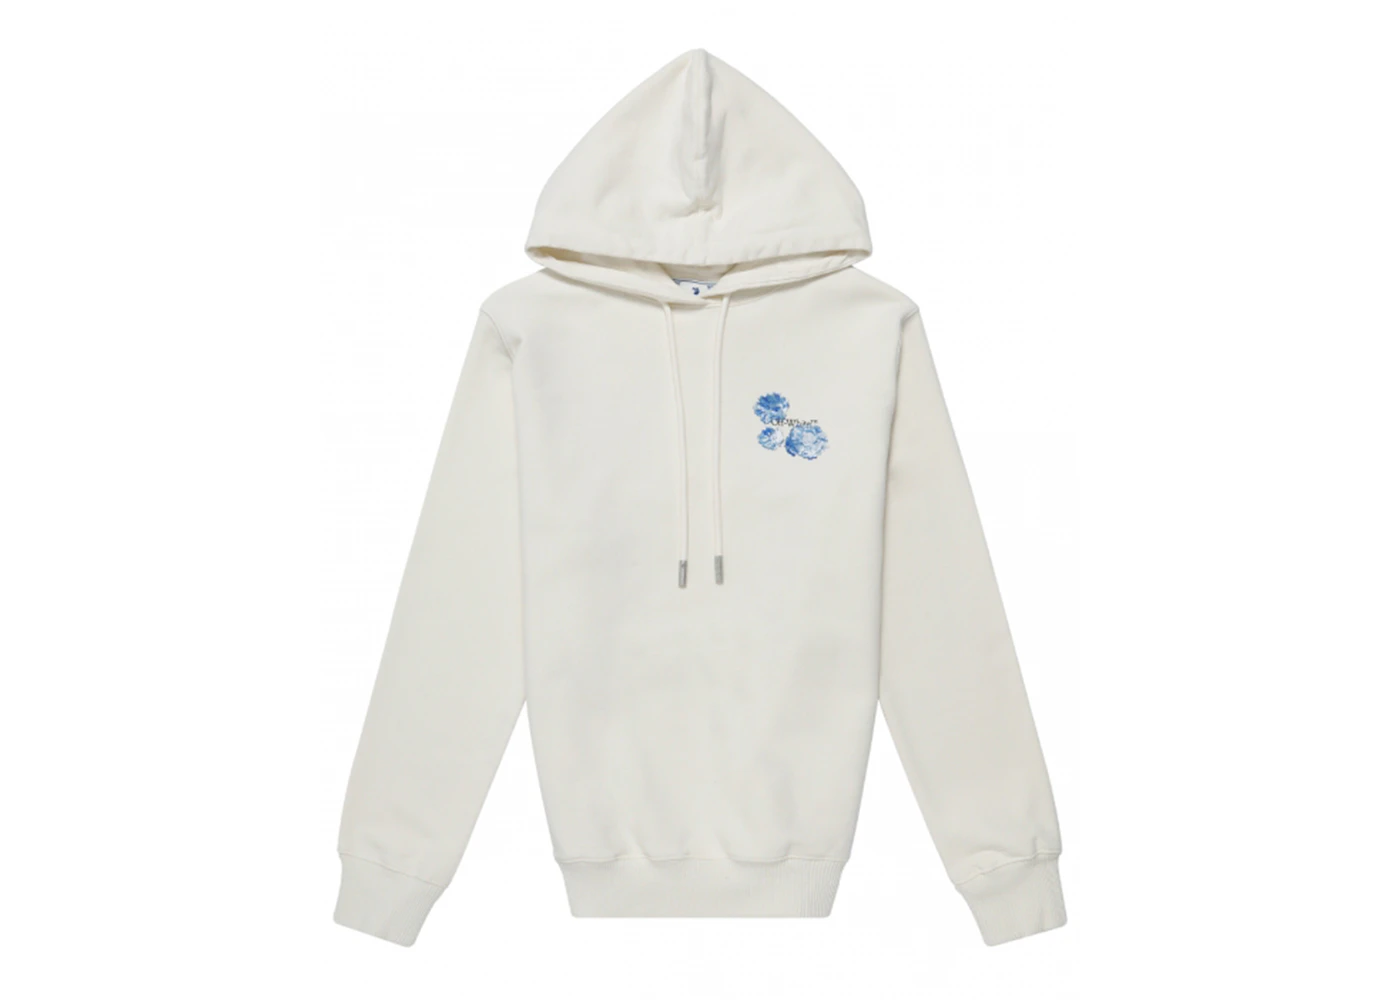 OFF-WHITE Womens Floral Arrows Hooded Sweatshirt White Blue - FW21 - US